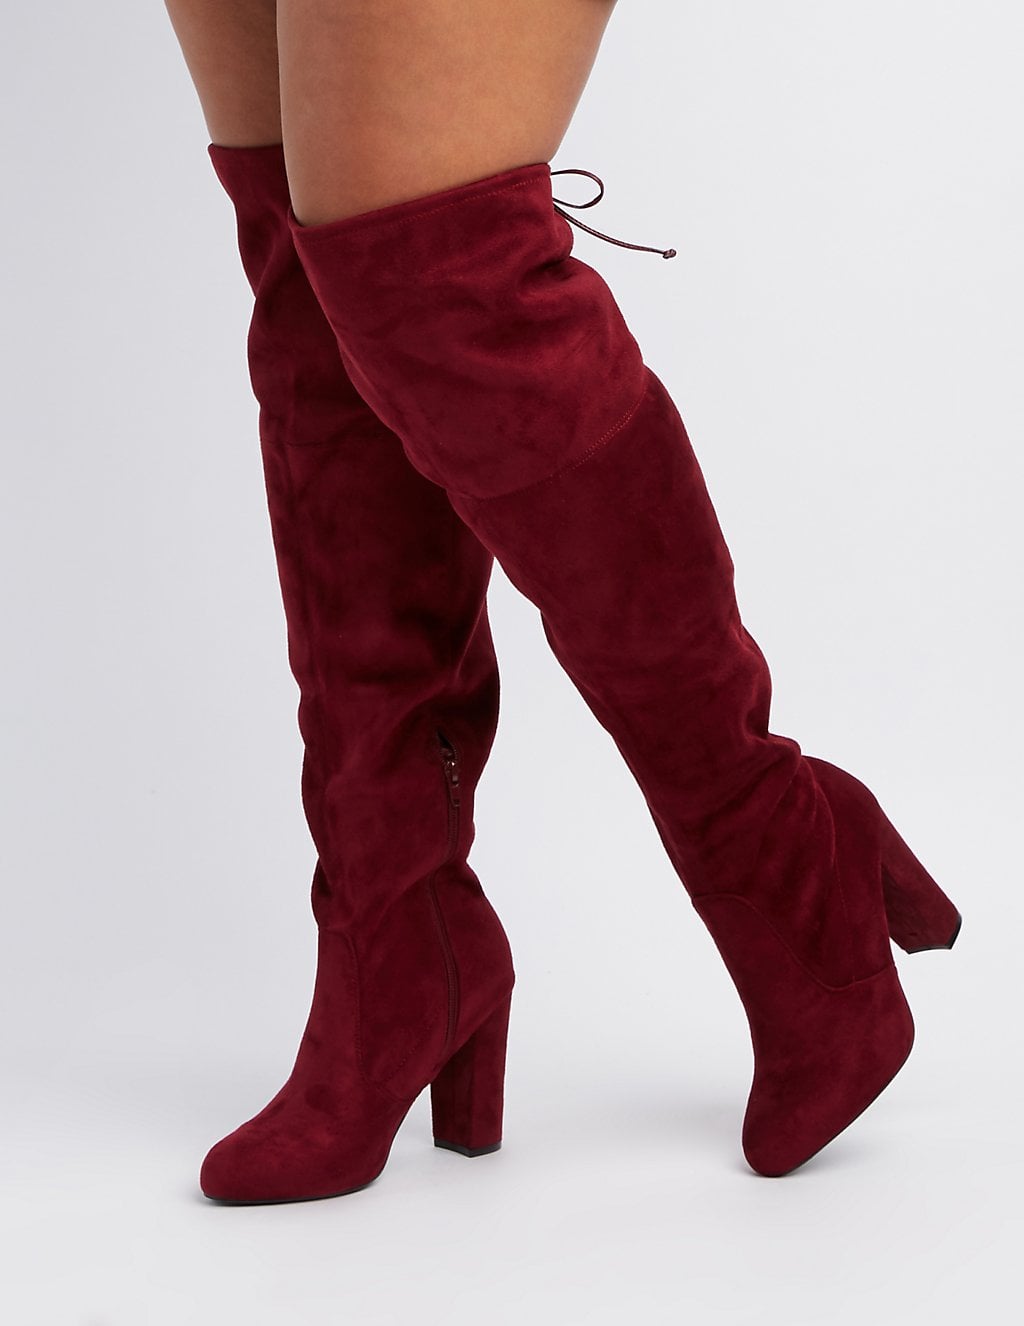 charlotte russe high boots